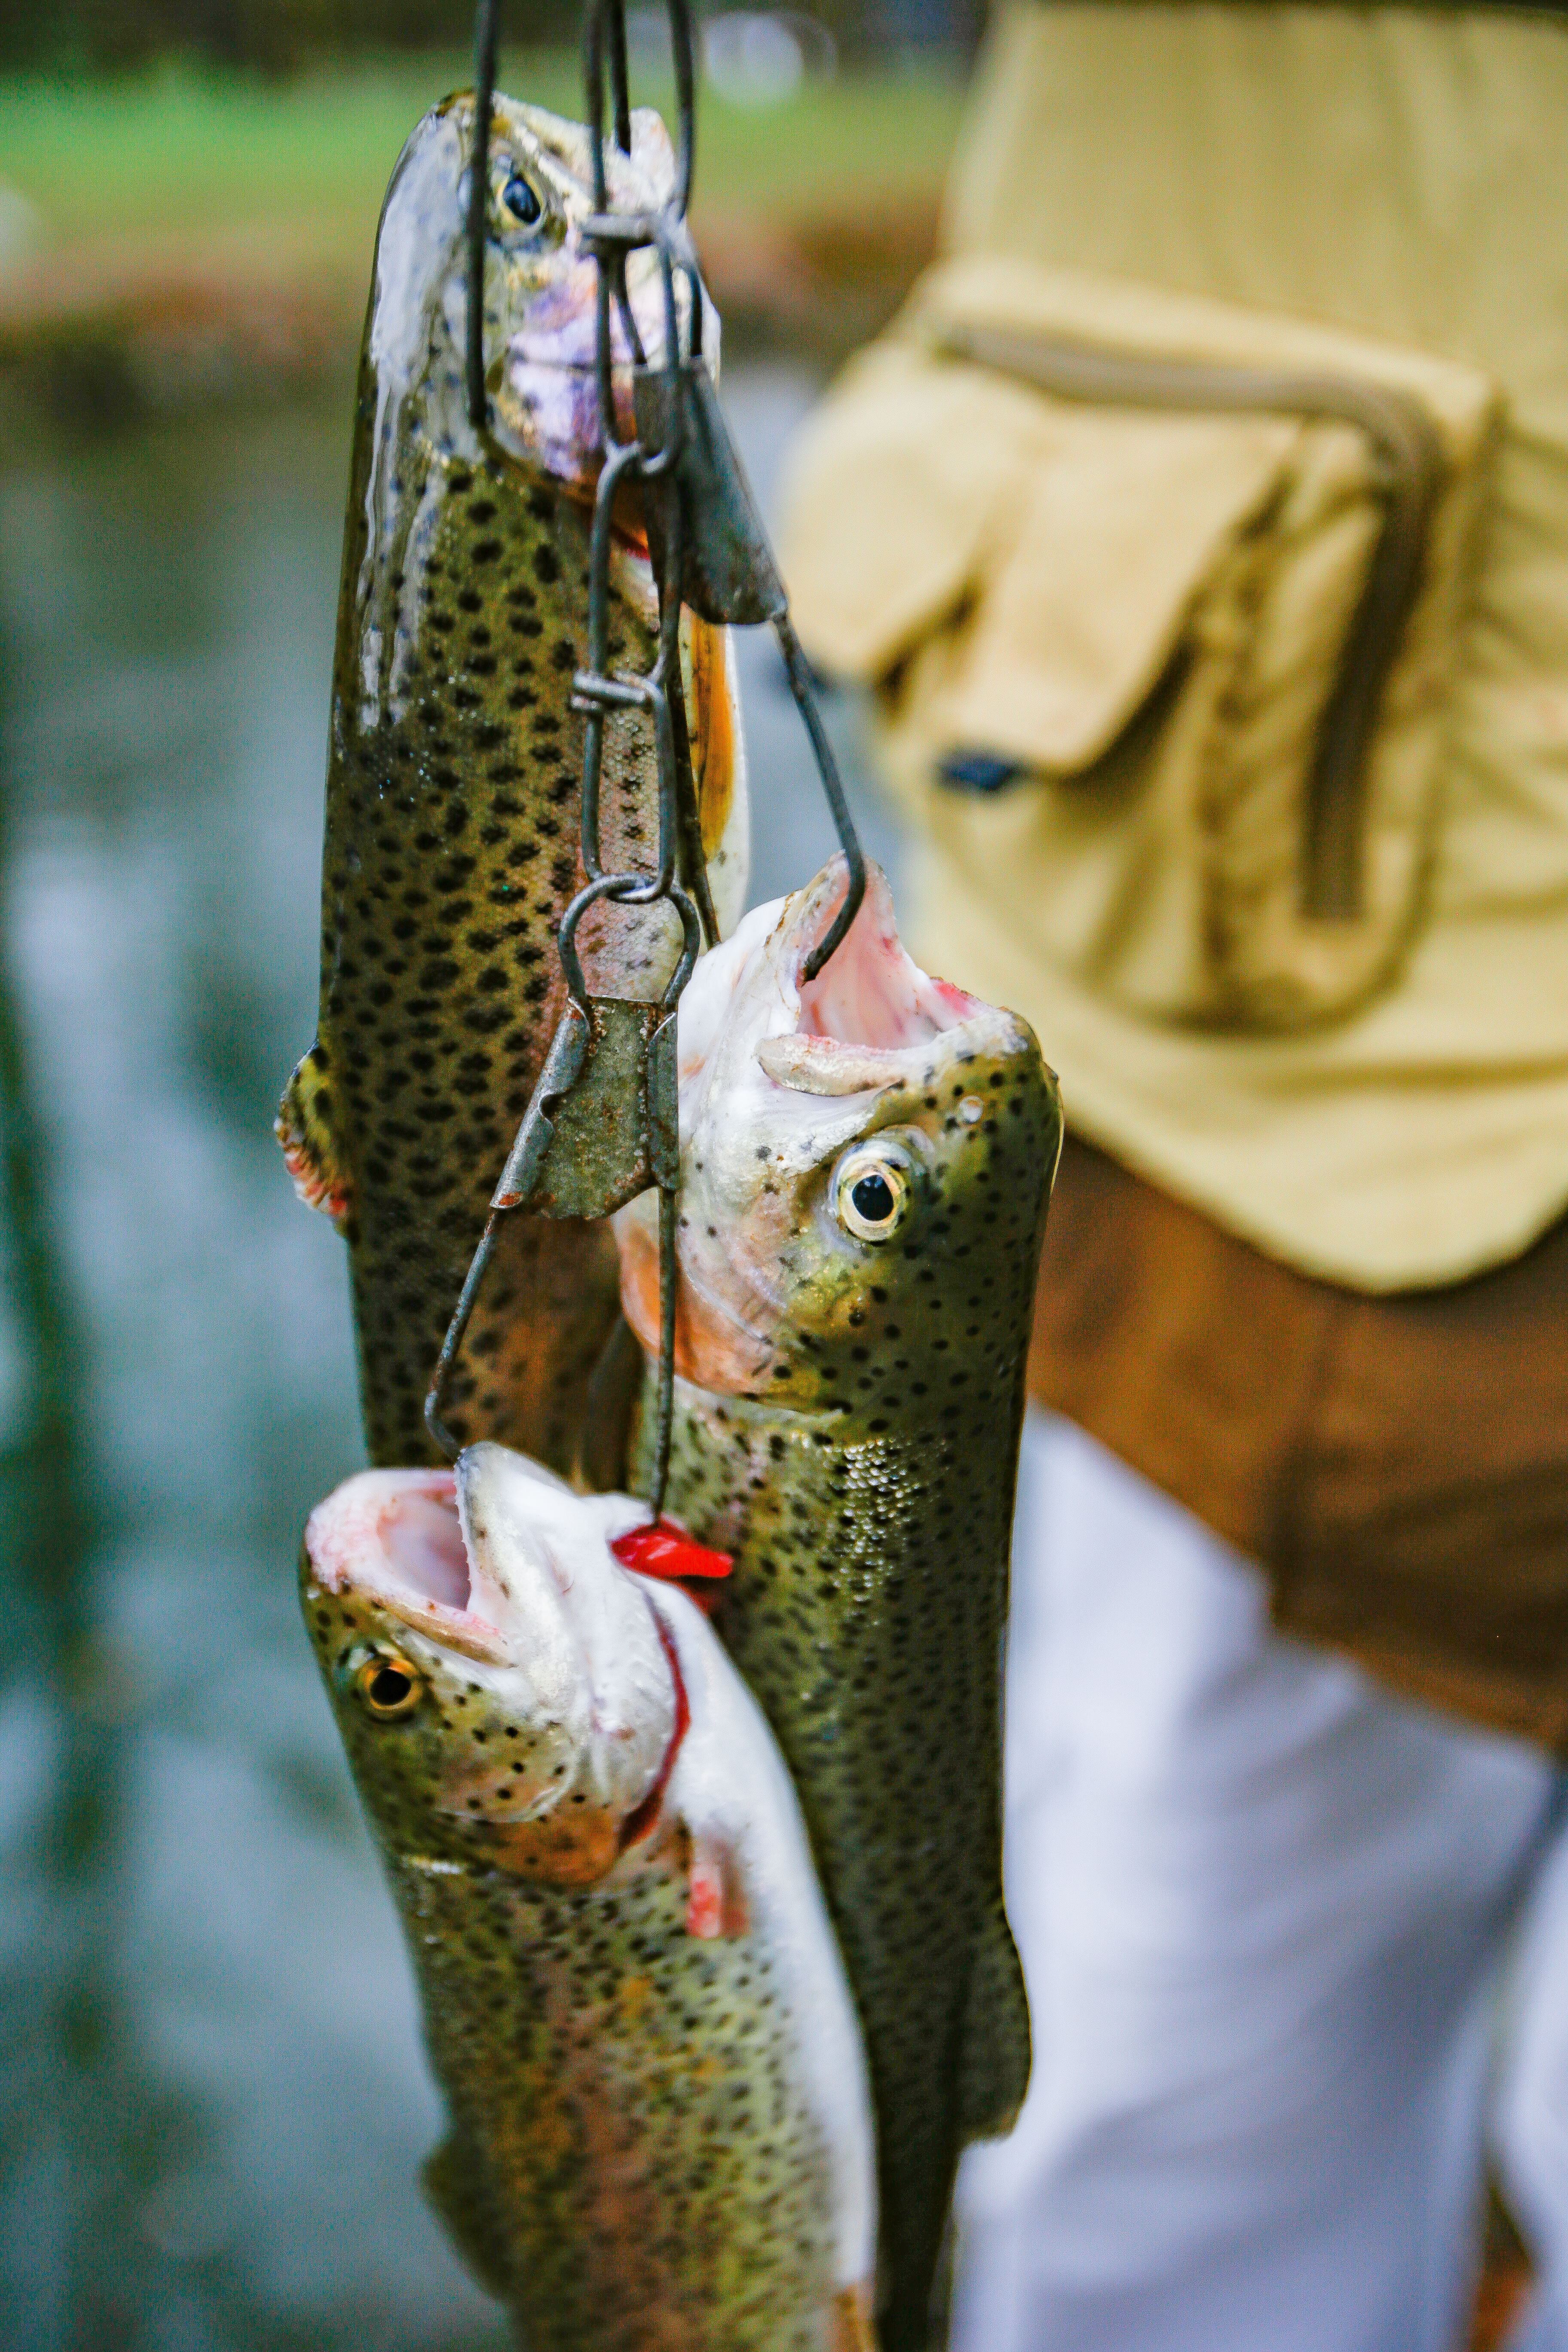 Attention, anglers! The PA Fish and Boat Commission wants you to vote on  the best design for 2021 fishing license buttons